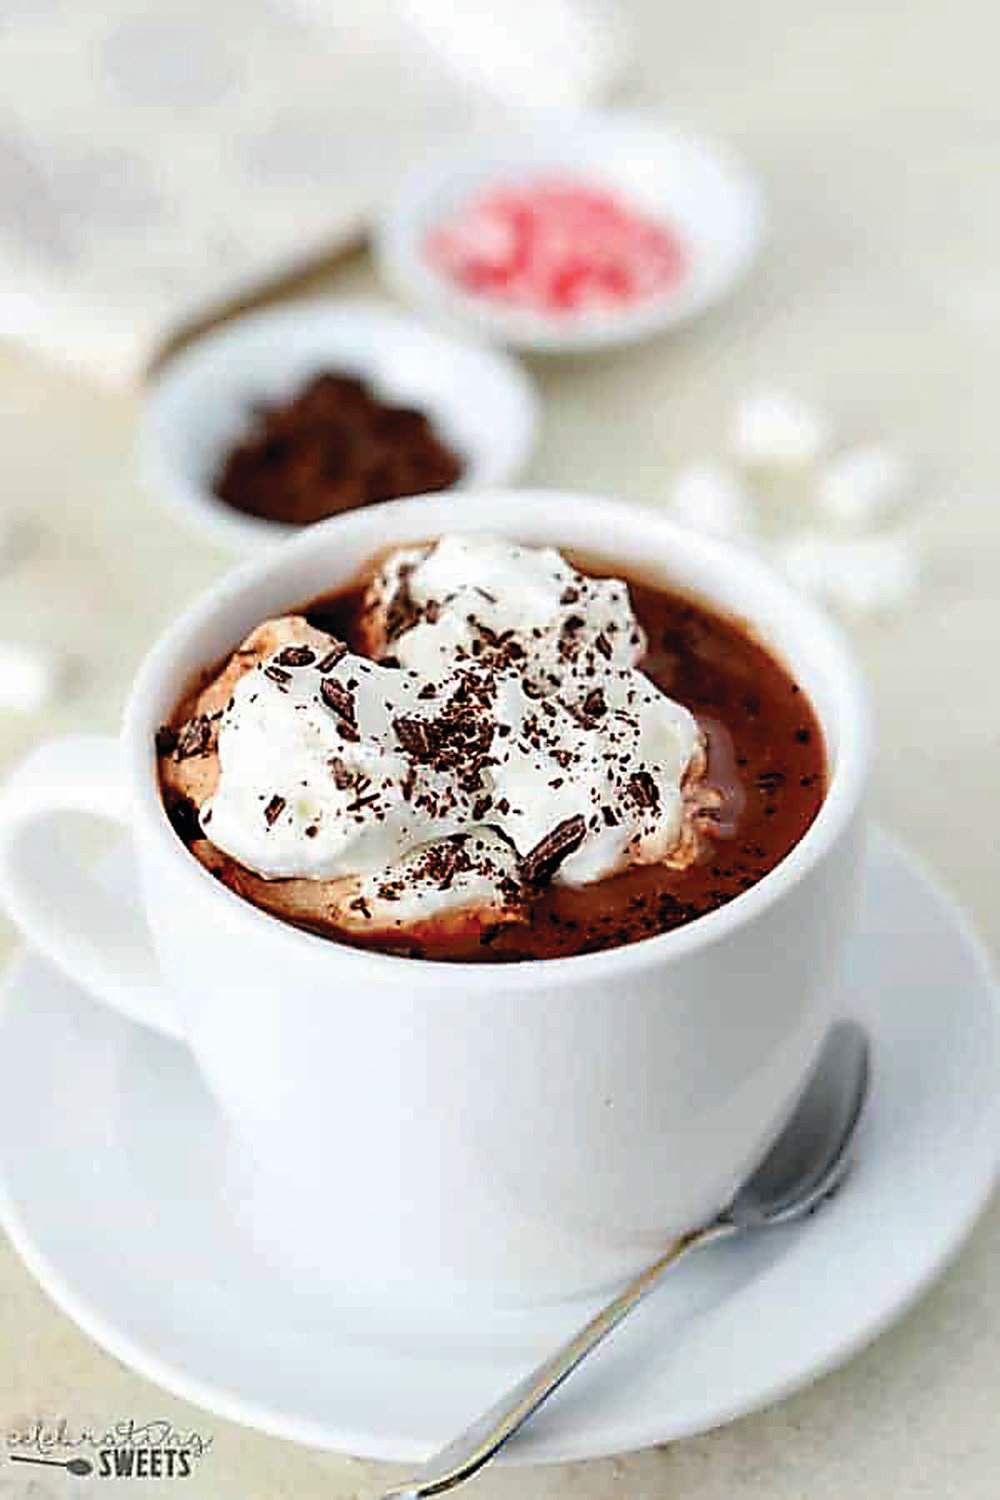 Hot chocolate, whether traditional or white, is a sweet way to warm up in winter.